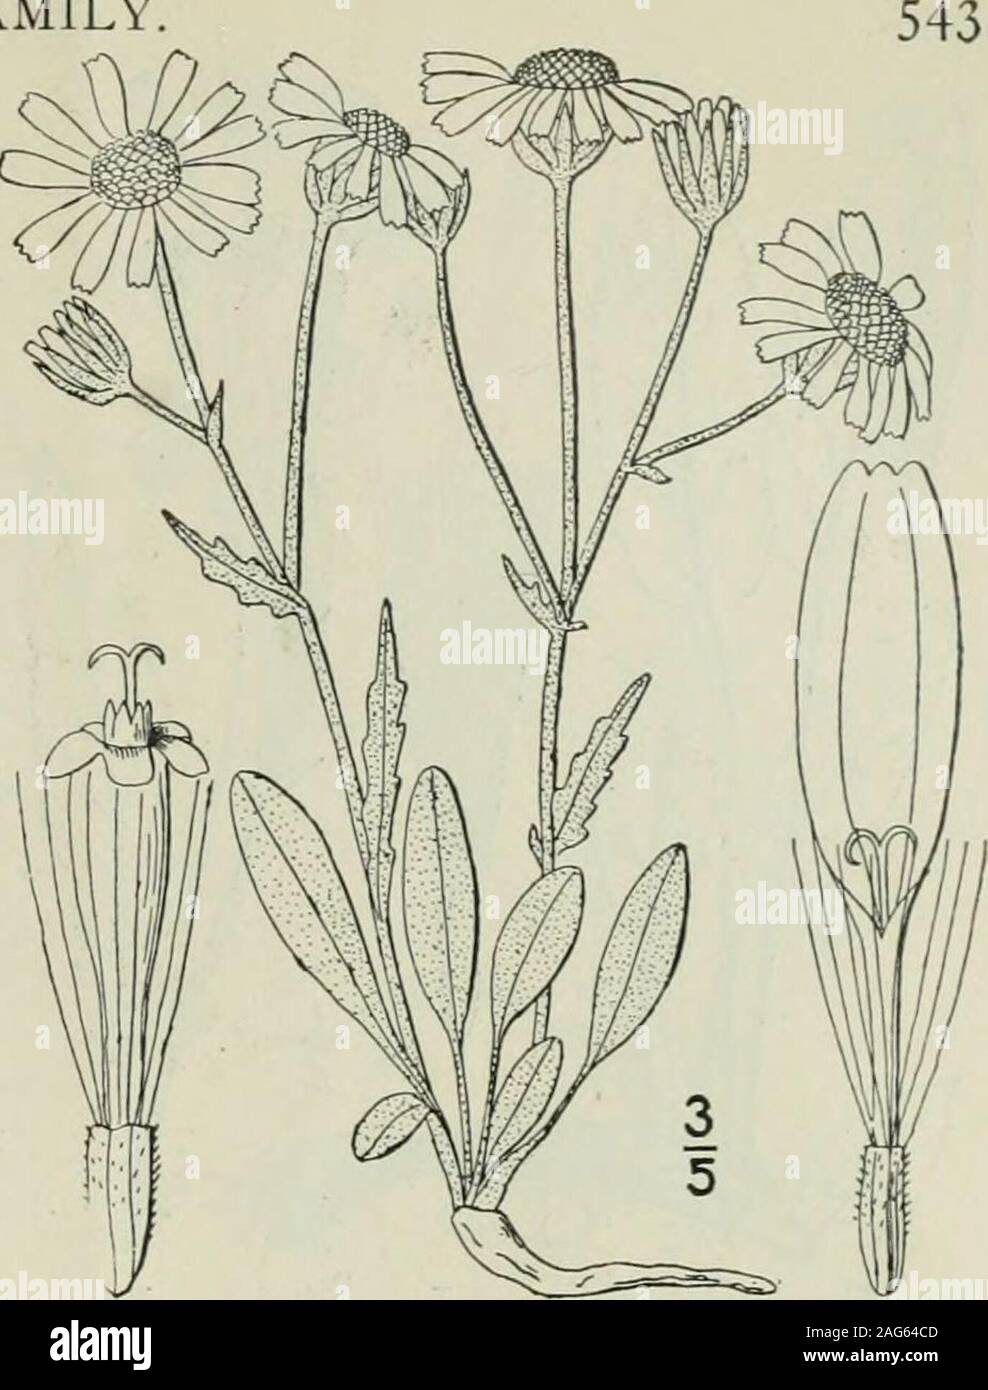 . An illustrated flora of the northern United States, Canada and the British possessions : from Newfoundland to the parallel of the southern boundary of Virginia and from the Atlantic Ocean westward to the 102nd meridian. mountains of Virginia and West Vir-ginia. May-June. Genus 102. THISTLE FAMILY, 12. Senecio canus Hook. Silvery Ground-sel. Fig. 4621. 5. canus Hook. Fl. Bor. Am. i : 333. p!. 116. 1833. 5. Purshianus Nutt. Trans. Am. Phil. Soc. (II) 7 :412. 1841. Perennial, densely and persistently white-tomentose to the inflorescence; stems slender,usually tufted, 6-i8 high. Basal and lowerl Stock Photo